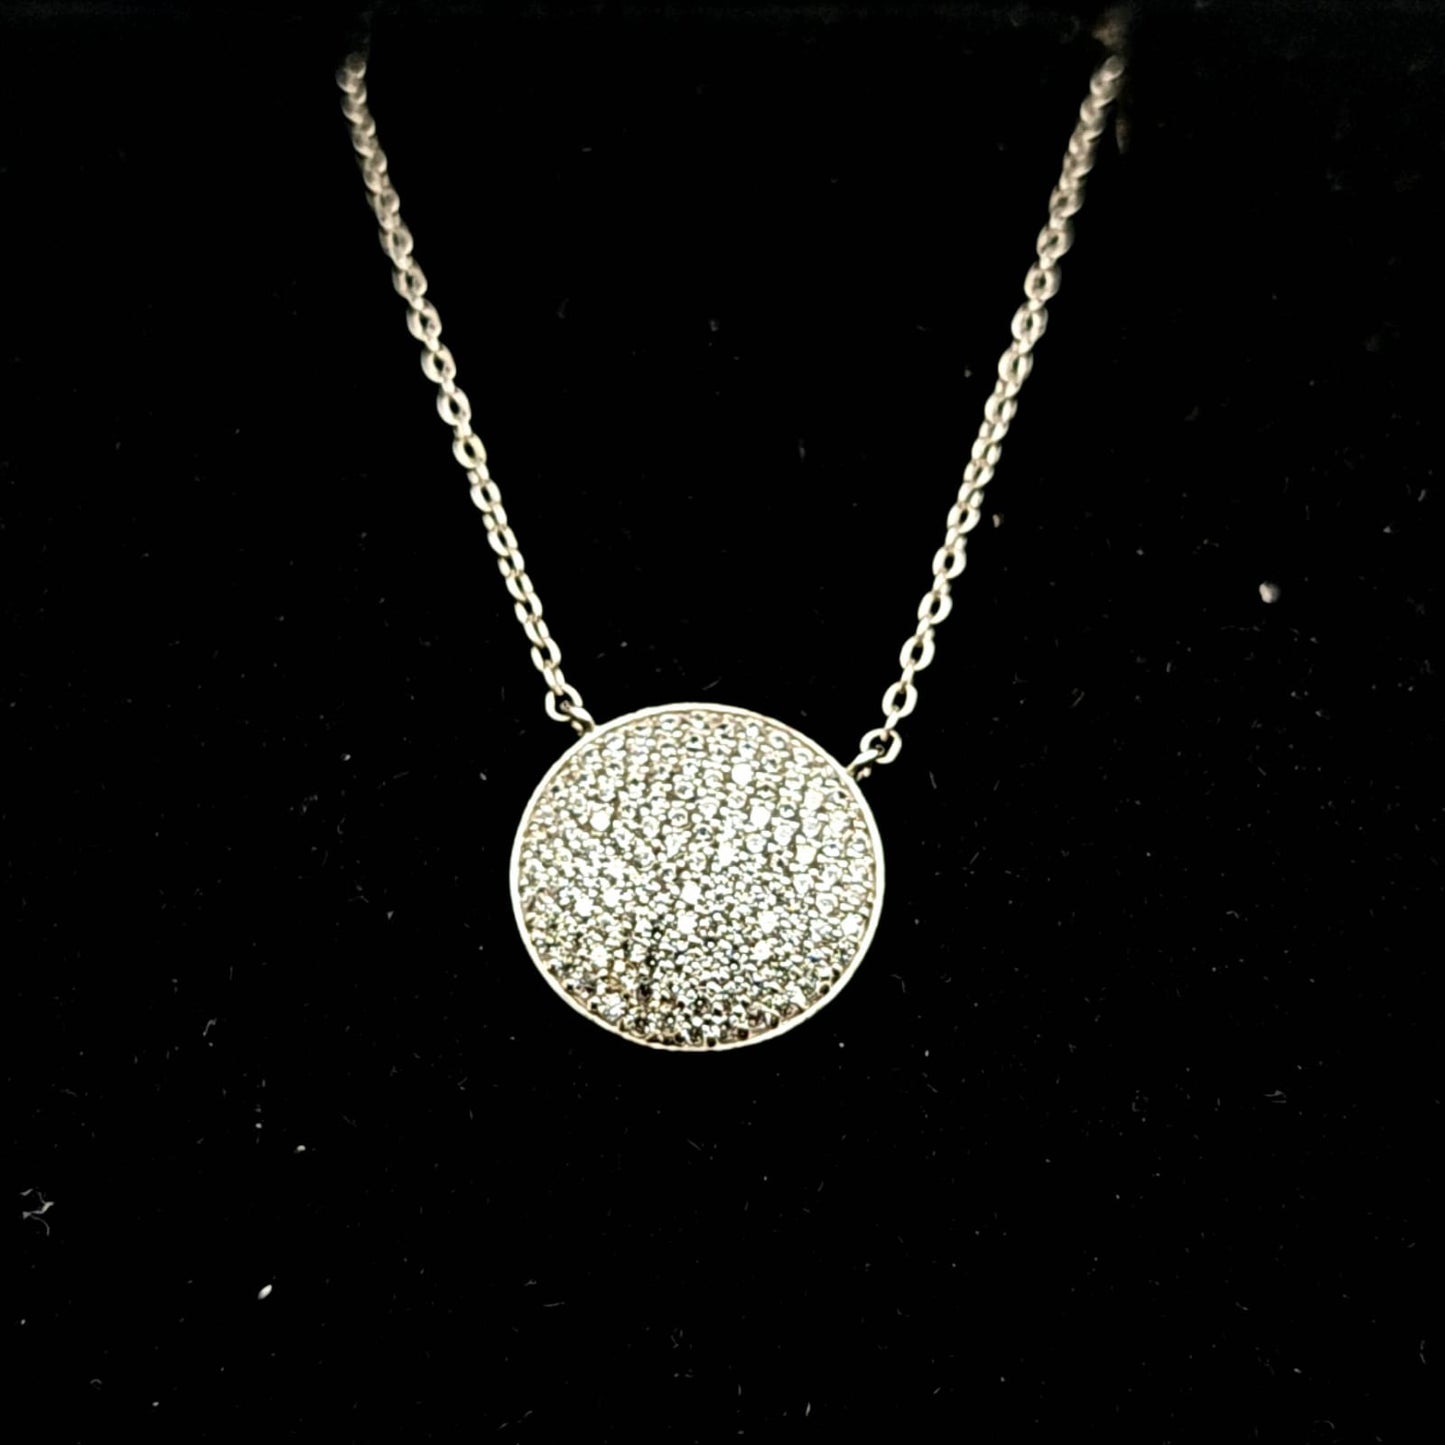 ROUND PENDENT NECKLACE